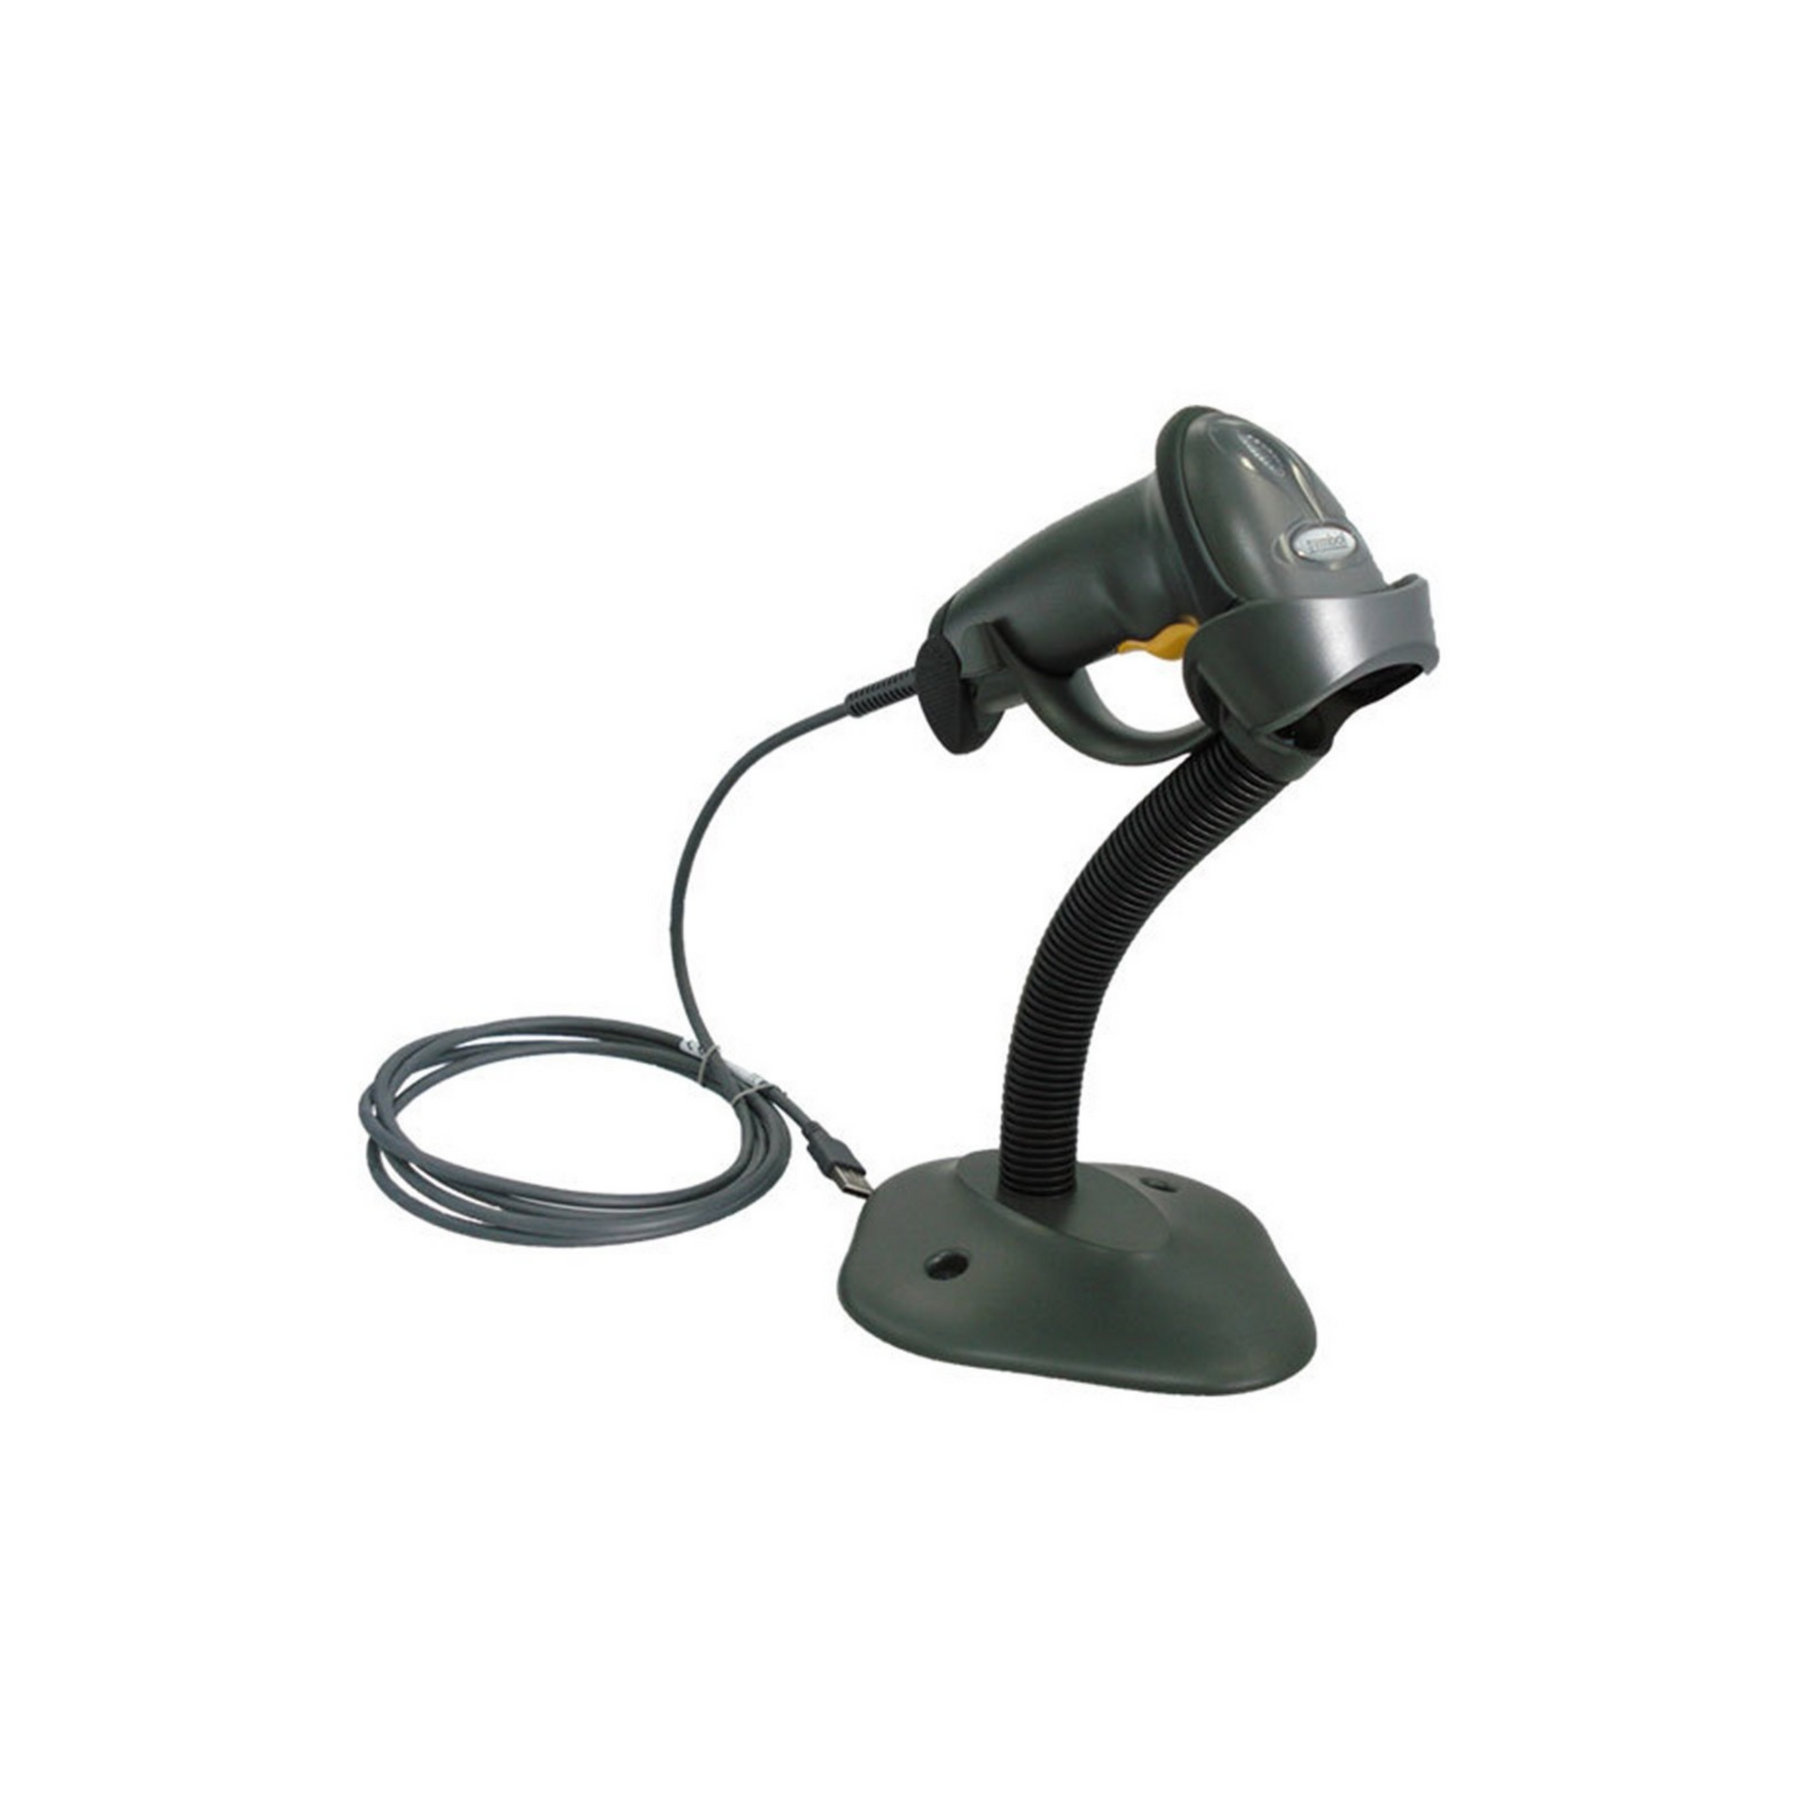 Zebra EVM LS2208, USB (PC) Kit, Includes Cable and Stand, North America Only (Black)